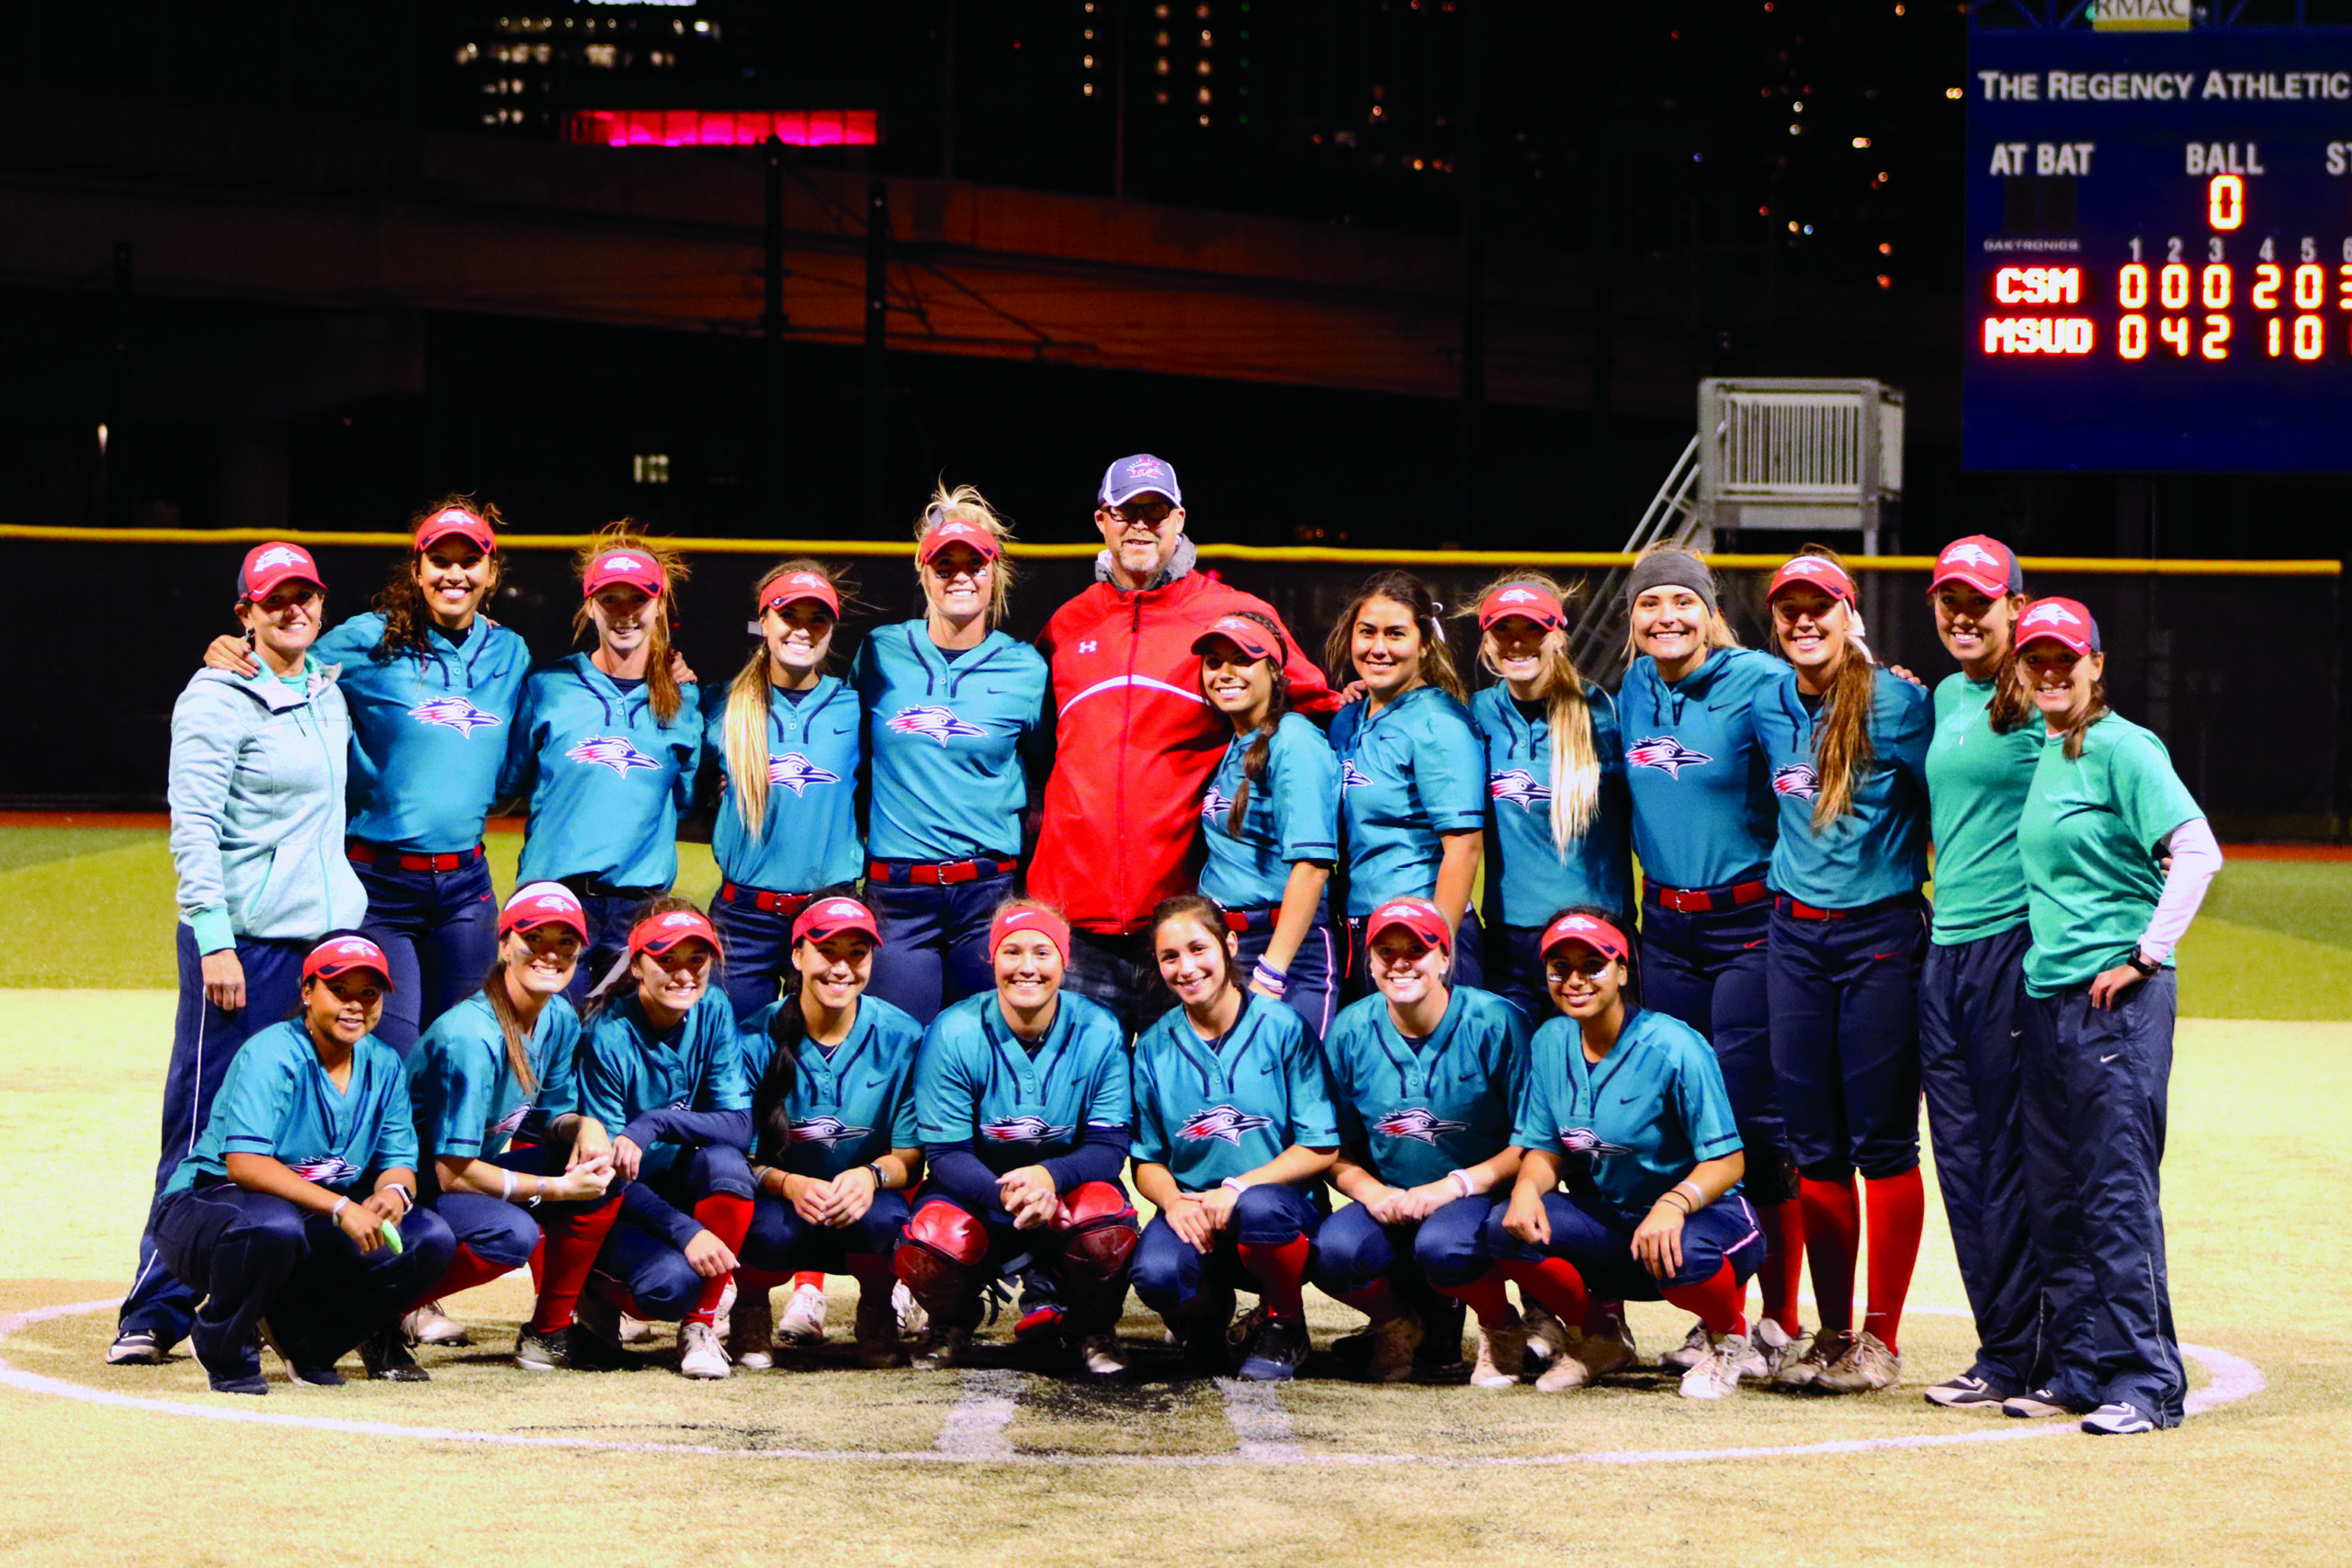 Jim Anderson standing with the softball team, wearing their teal jerseys for Strikeout Cancer